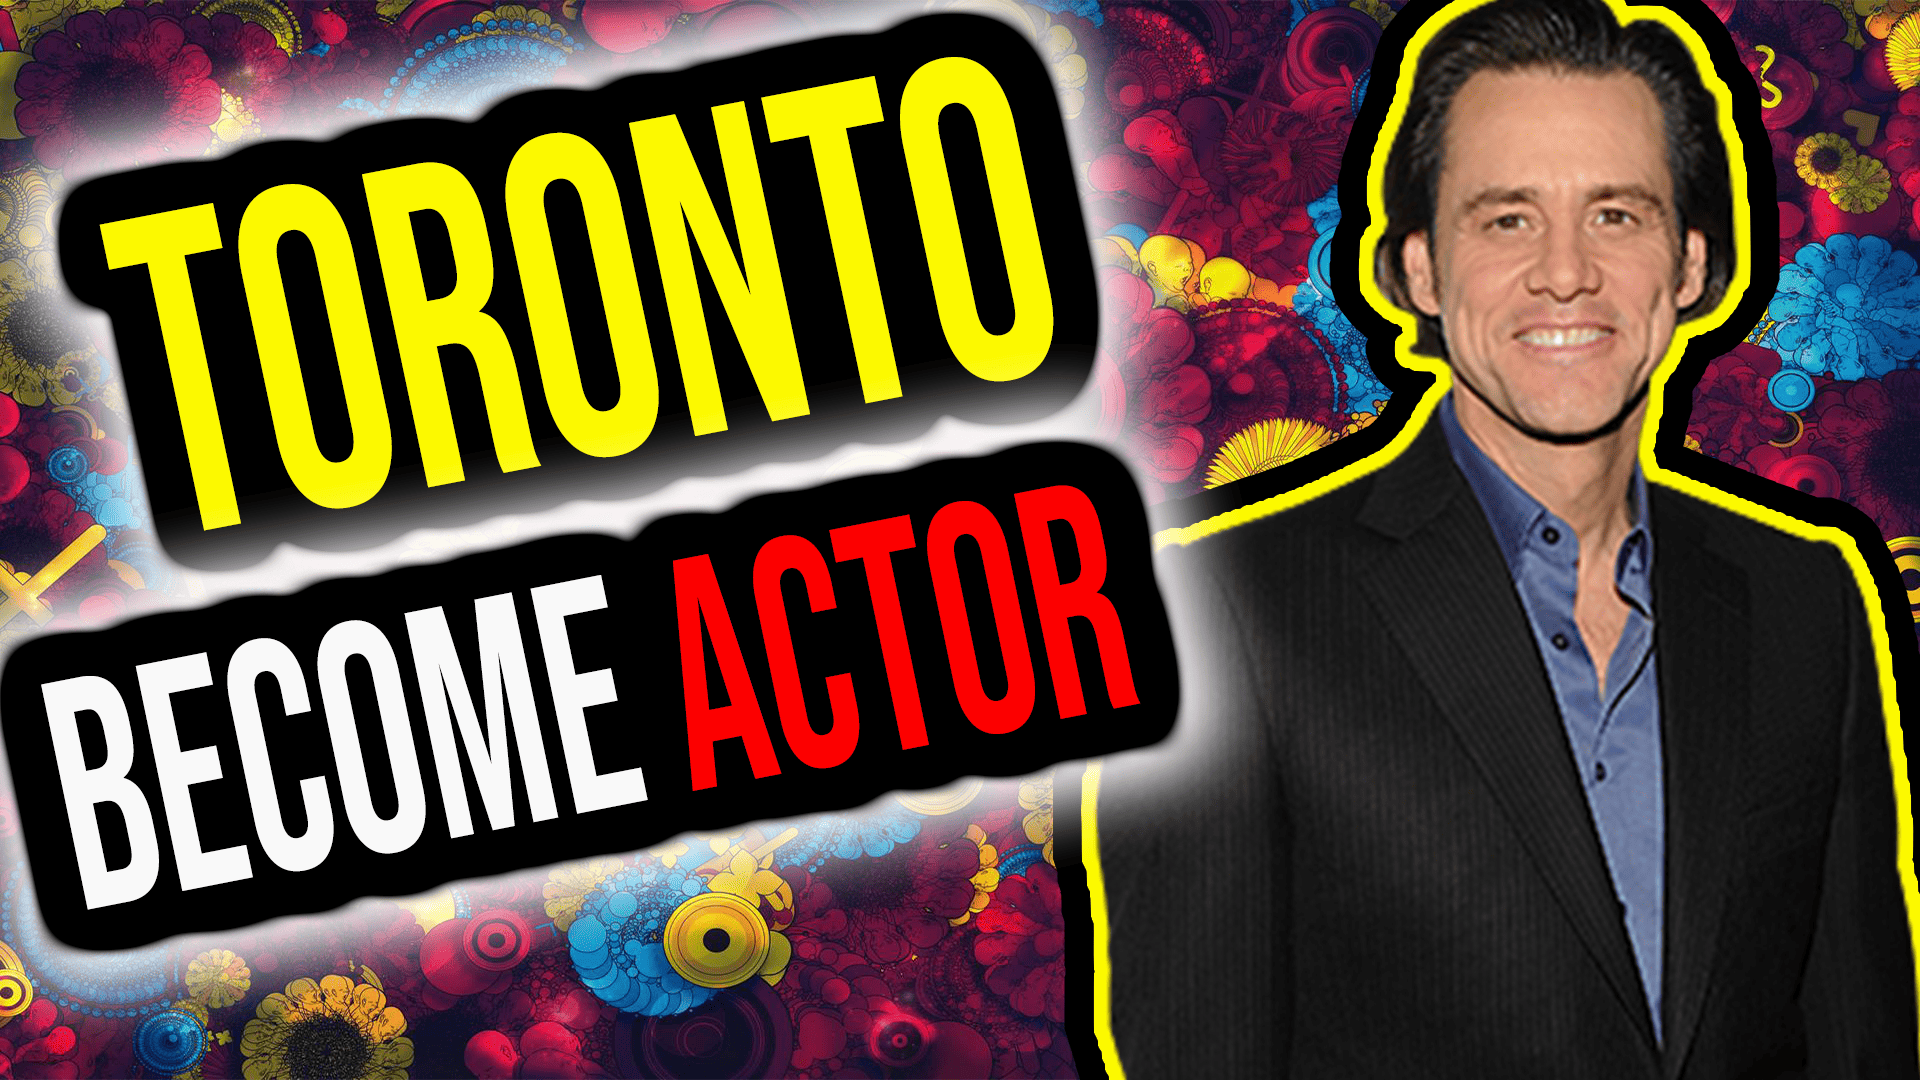 How To Be An Actor In Toronto: A Step-By-Step Guide To Making It Big